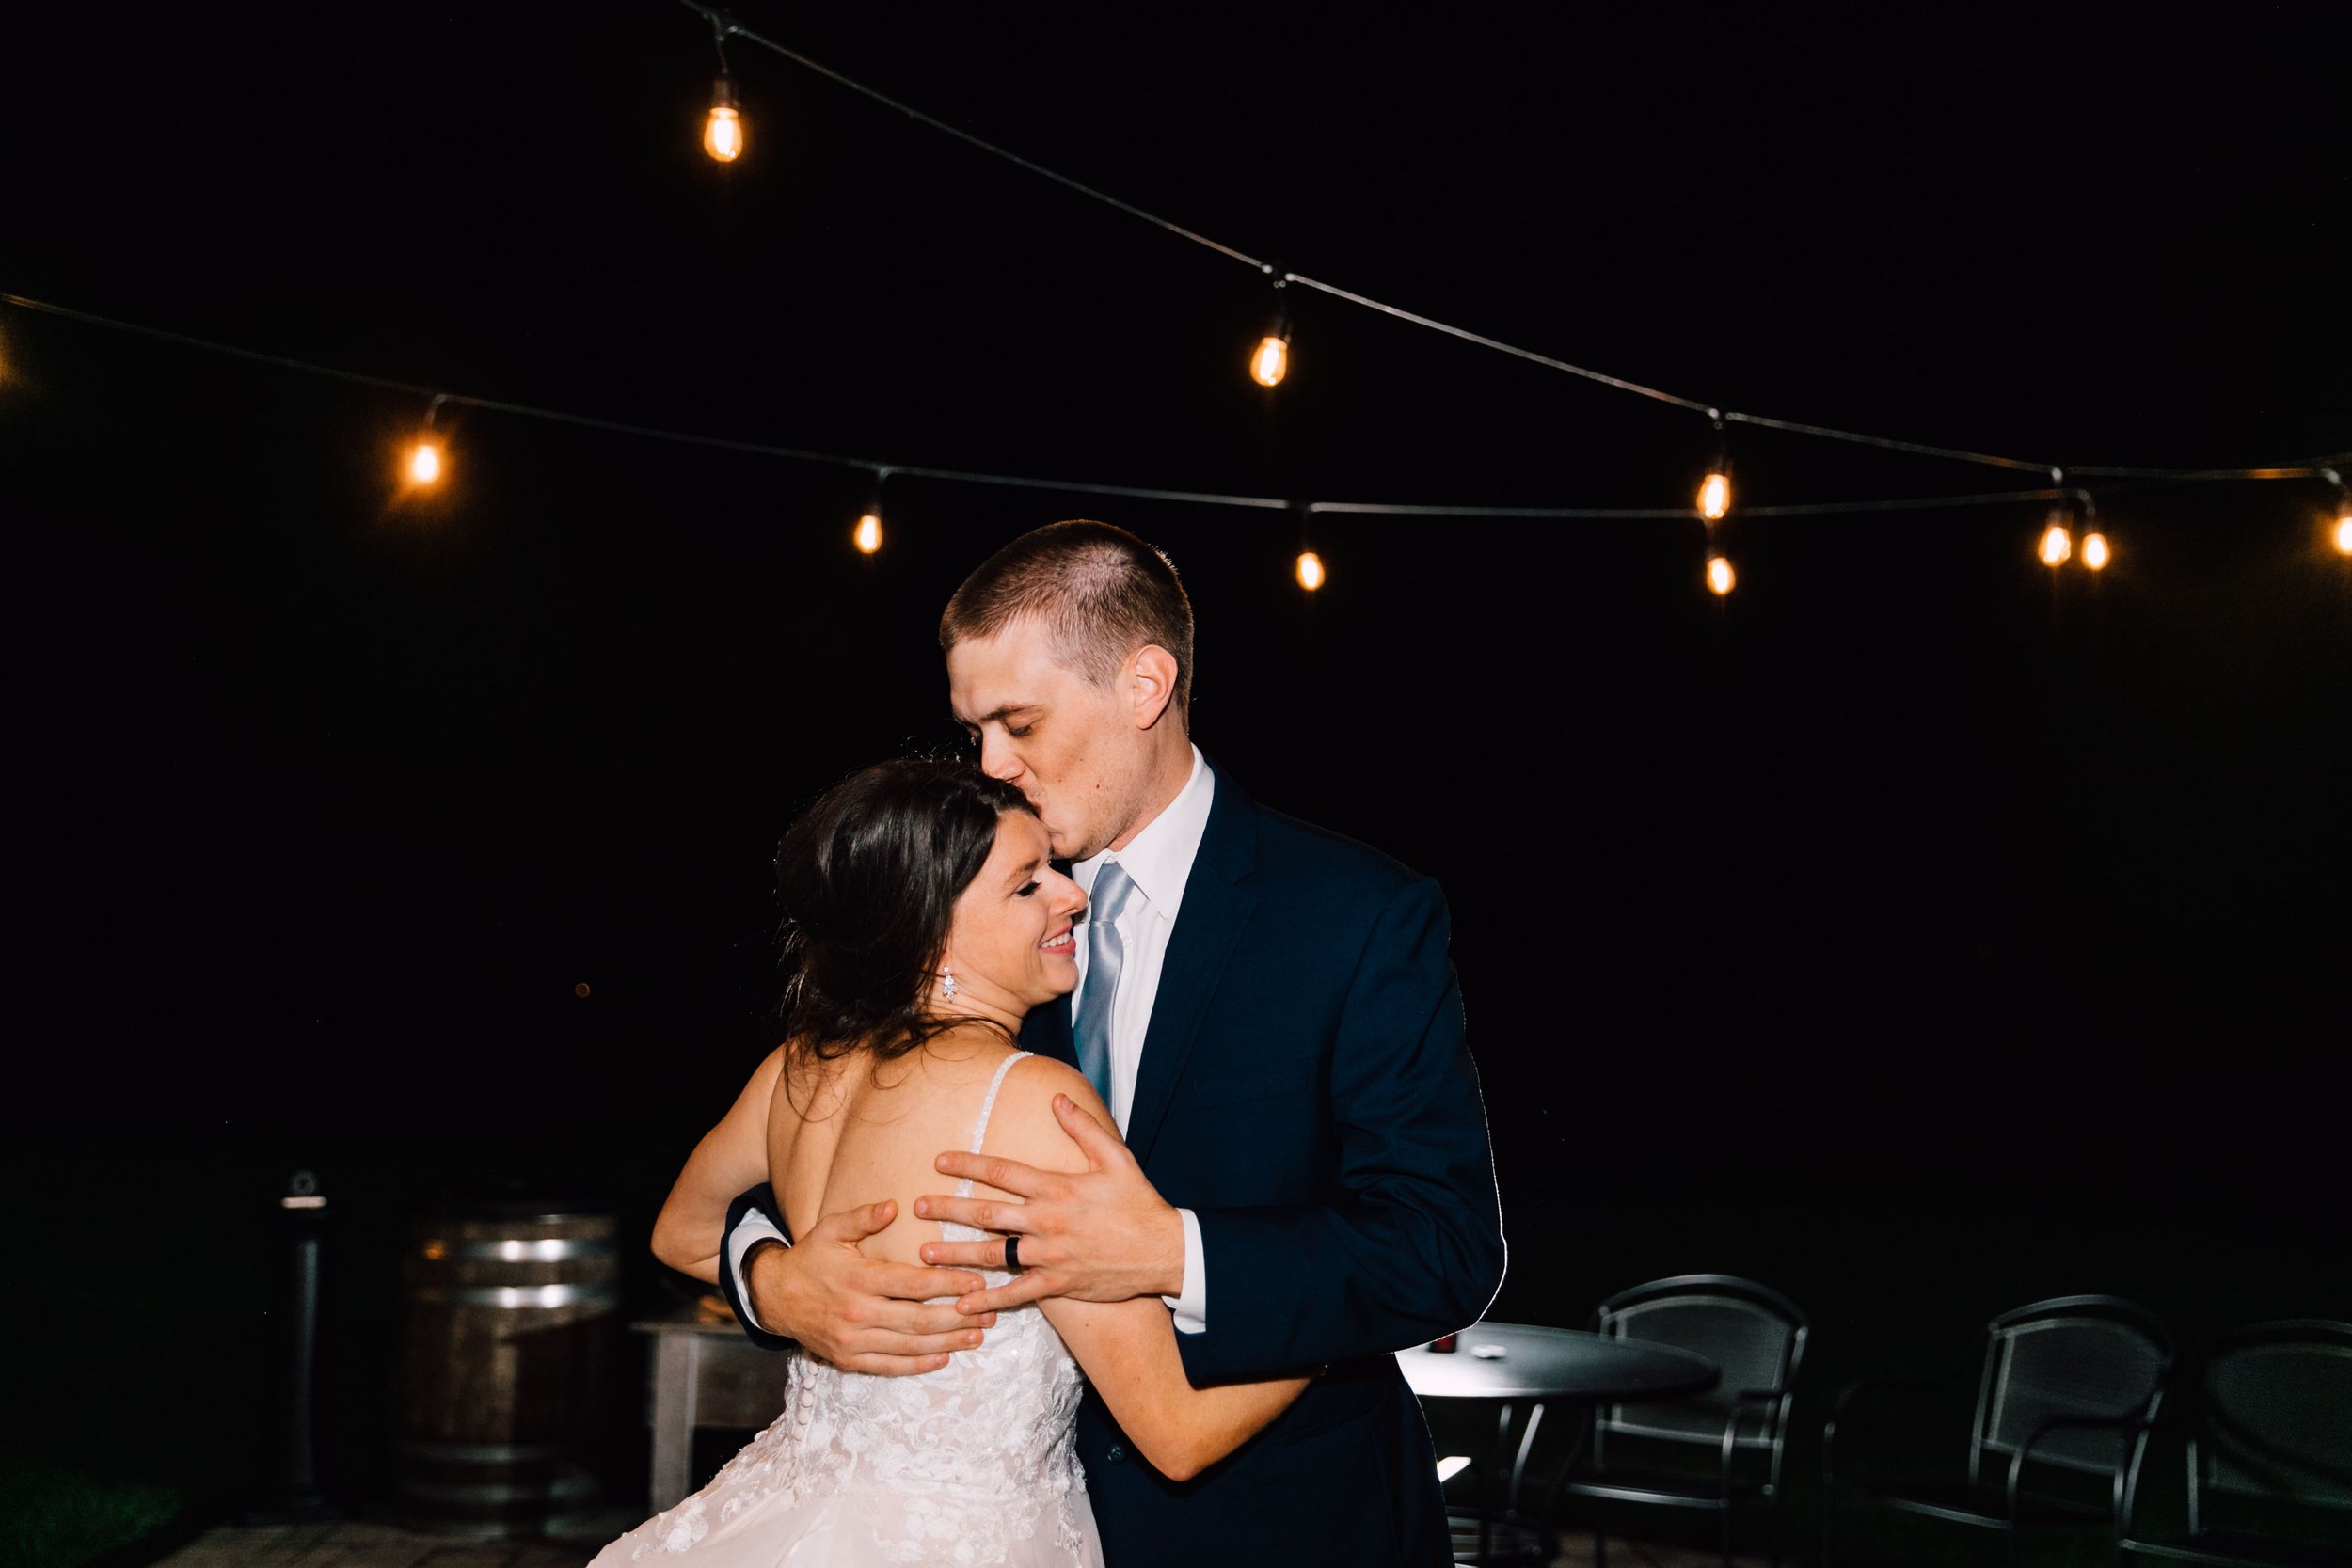  the groom kisses the bride on the forehead during night portraits at their outdoor fall wedding 